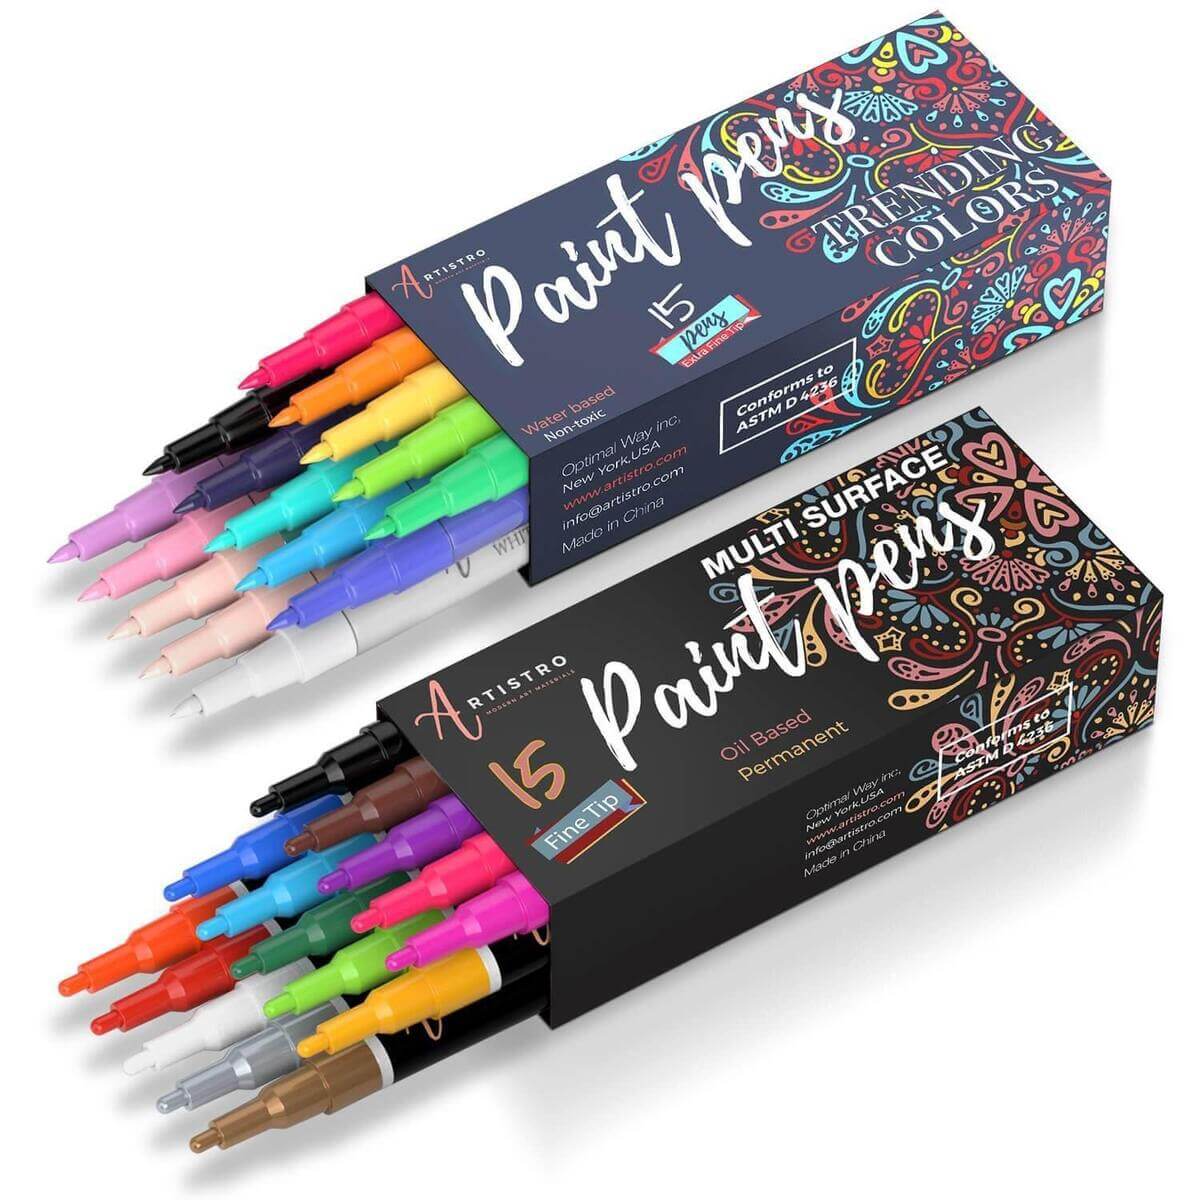 42 Artistro Cute Paint Pens 12 Metallic Markers Extra Fine 30 Fine  Extra-tip Markers for Rock Painting, Kids Craft, Family Painting 